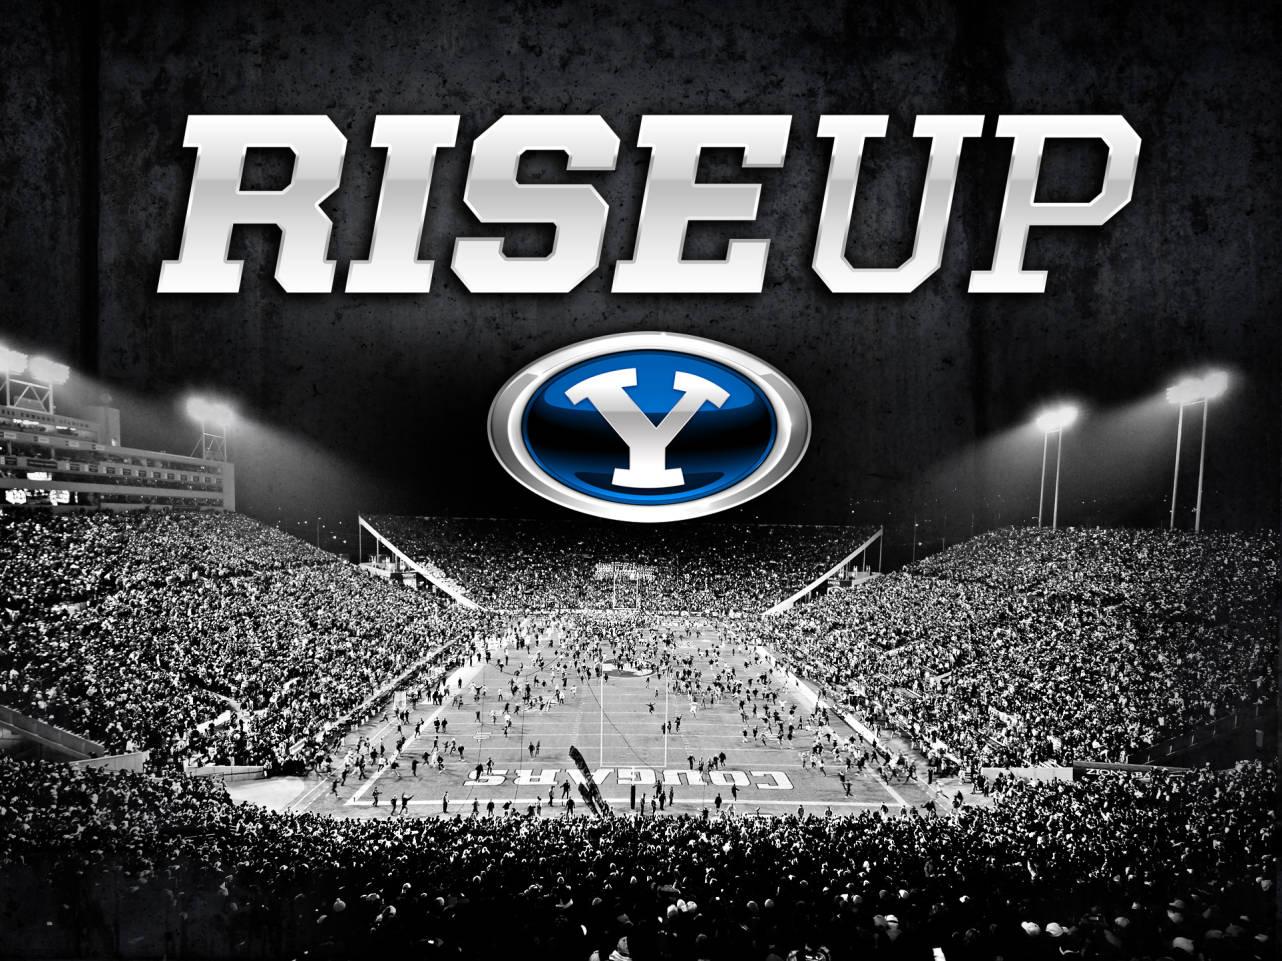 Byu Basketball, Pics, Picture, Image, Photo